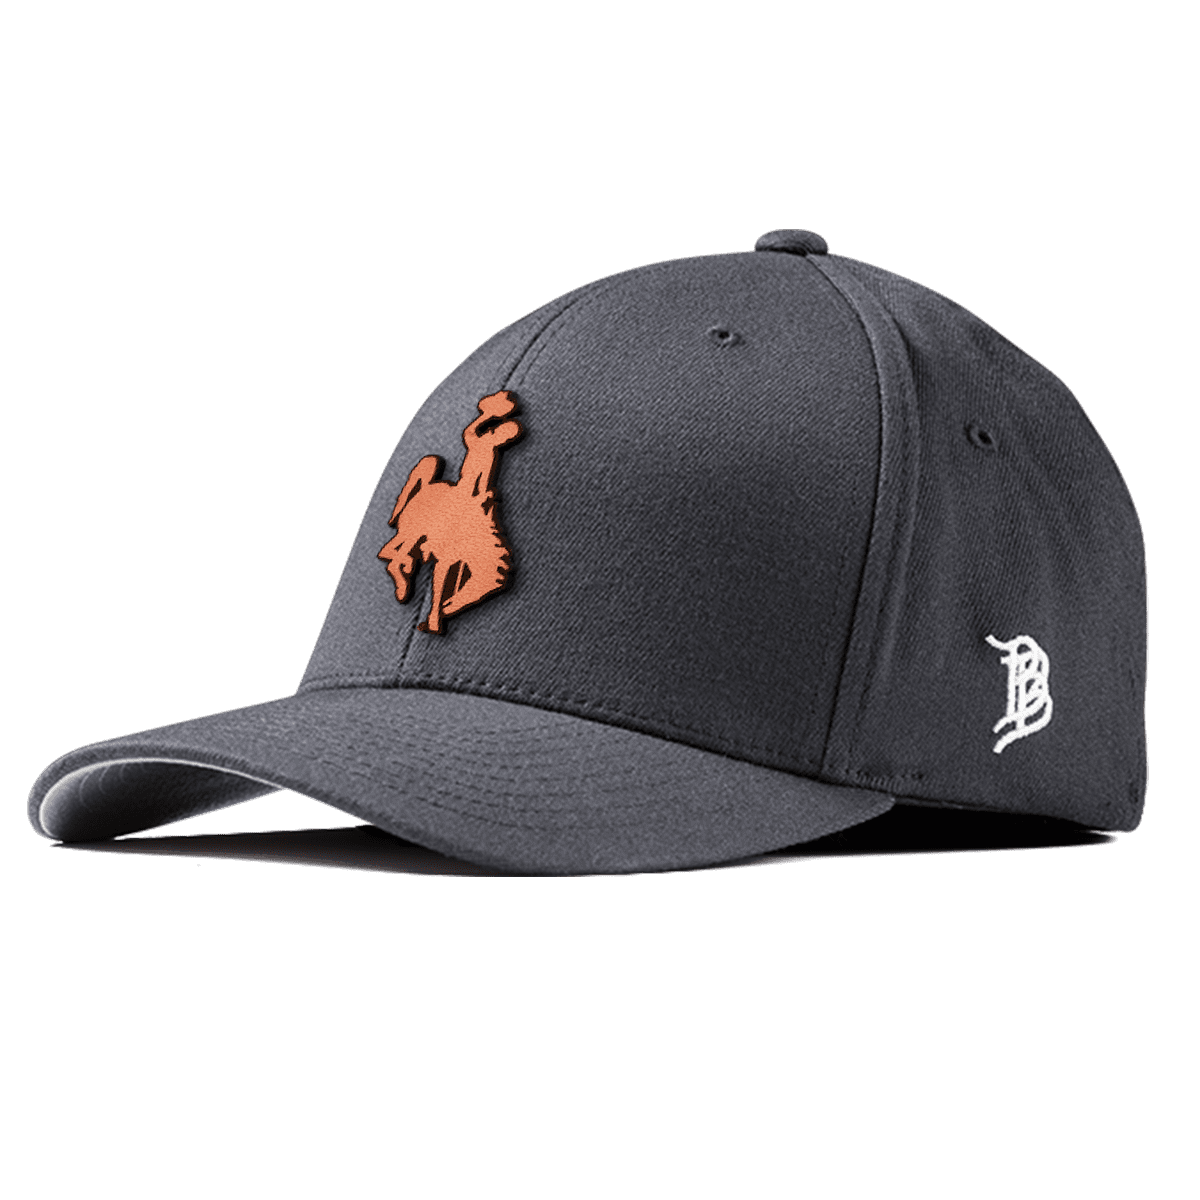 Wyoming Cowboy Flexfit Fitted Tan Logo Charcoal